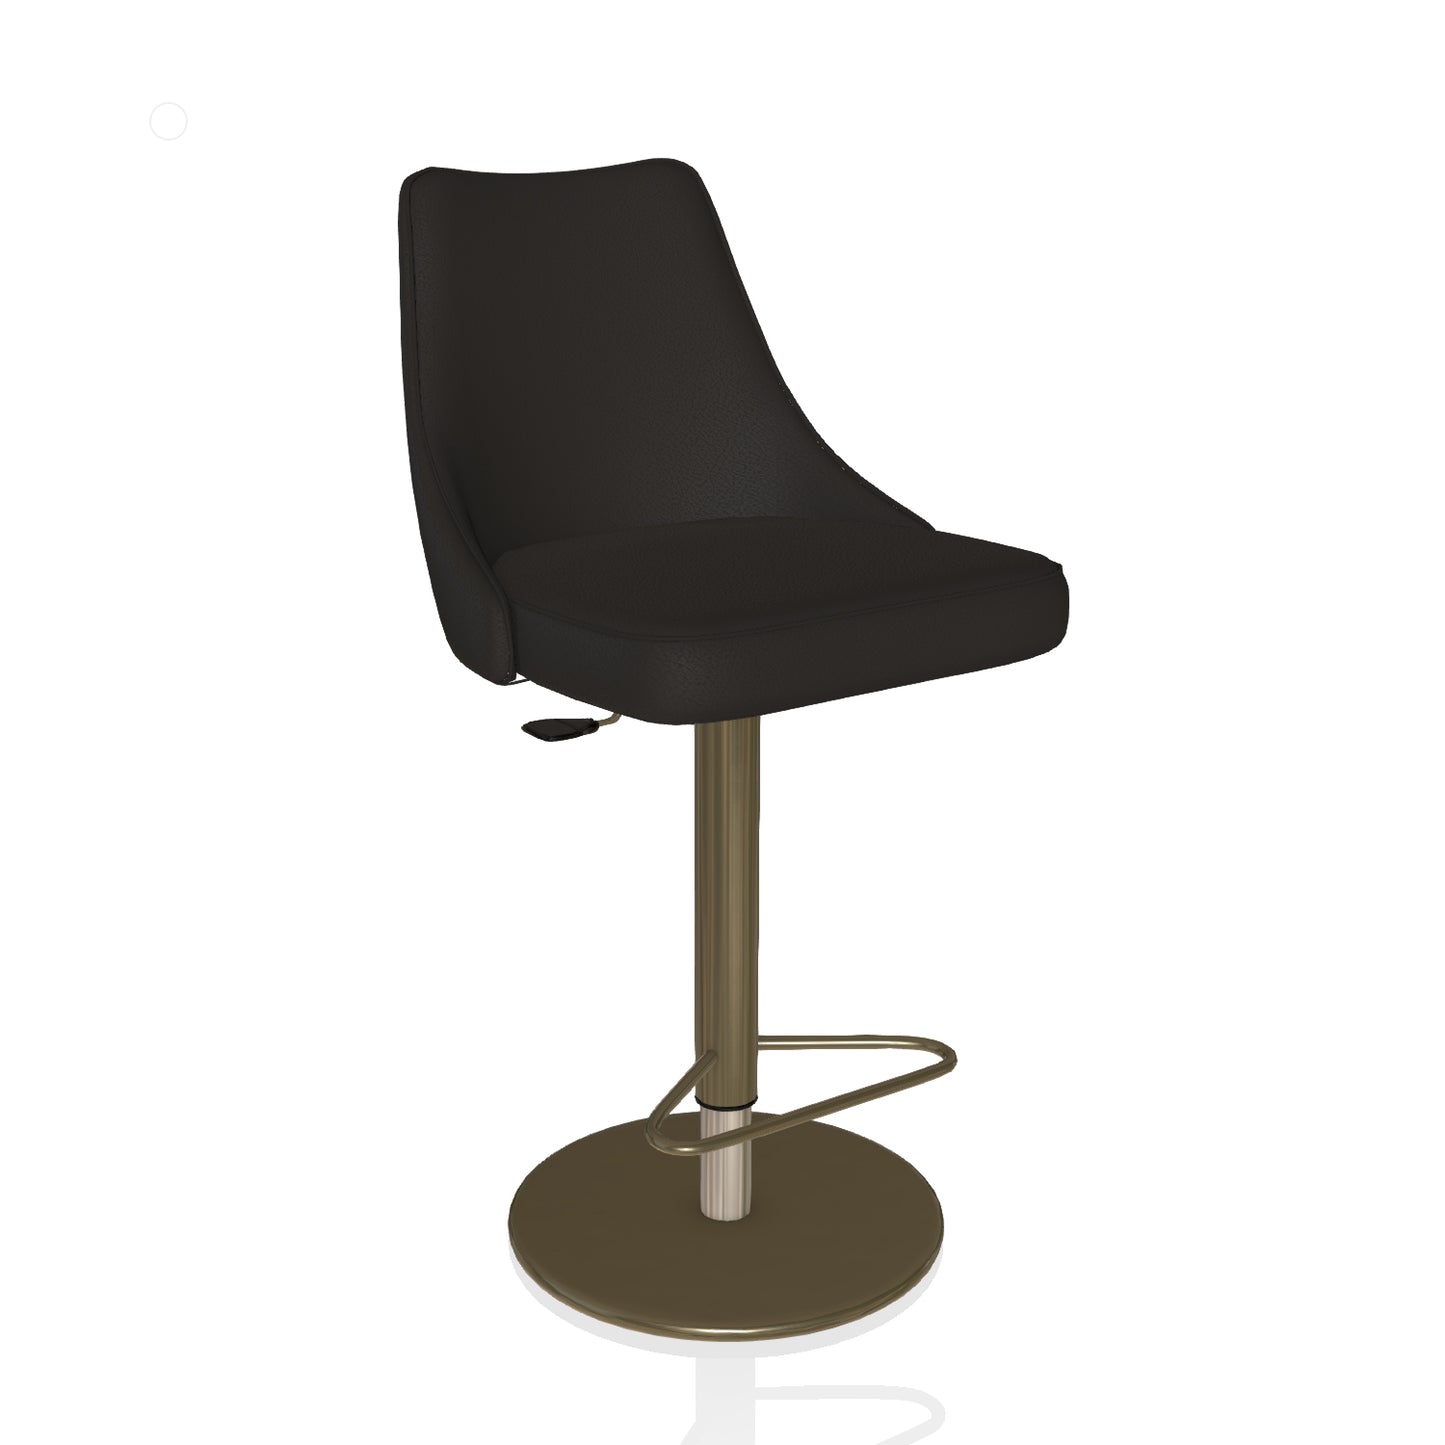 Clara Swivel Bar Stool By Bontempi Casa - Eco Dark Brown Leather & Piping With Aged Brass Base